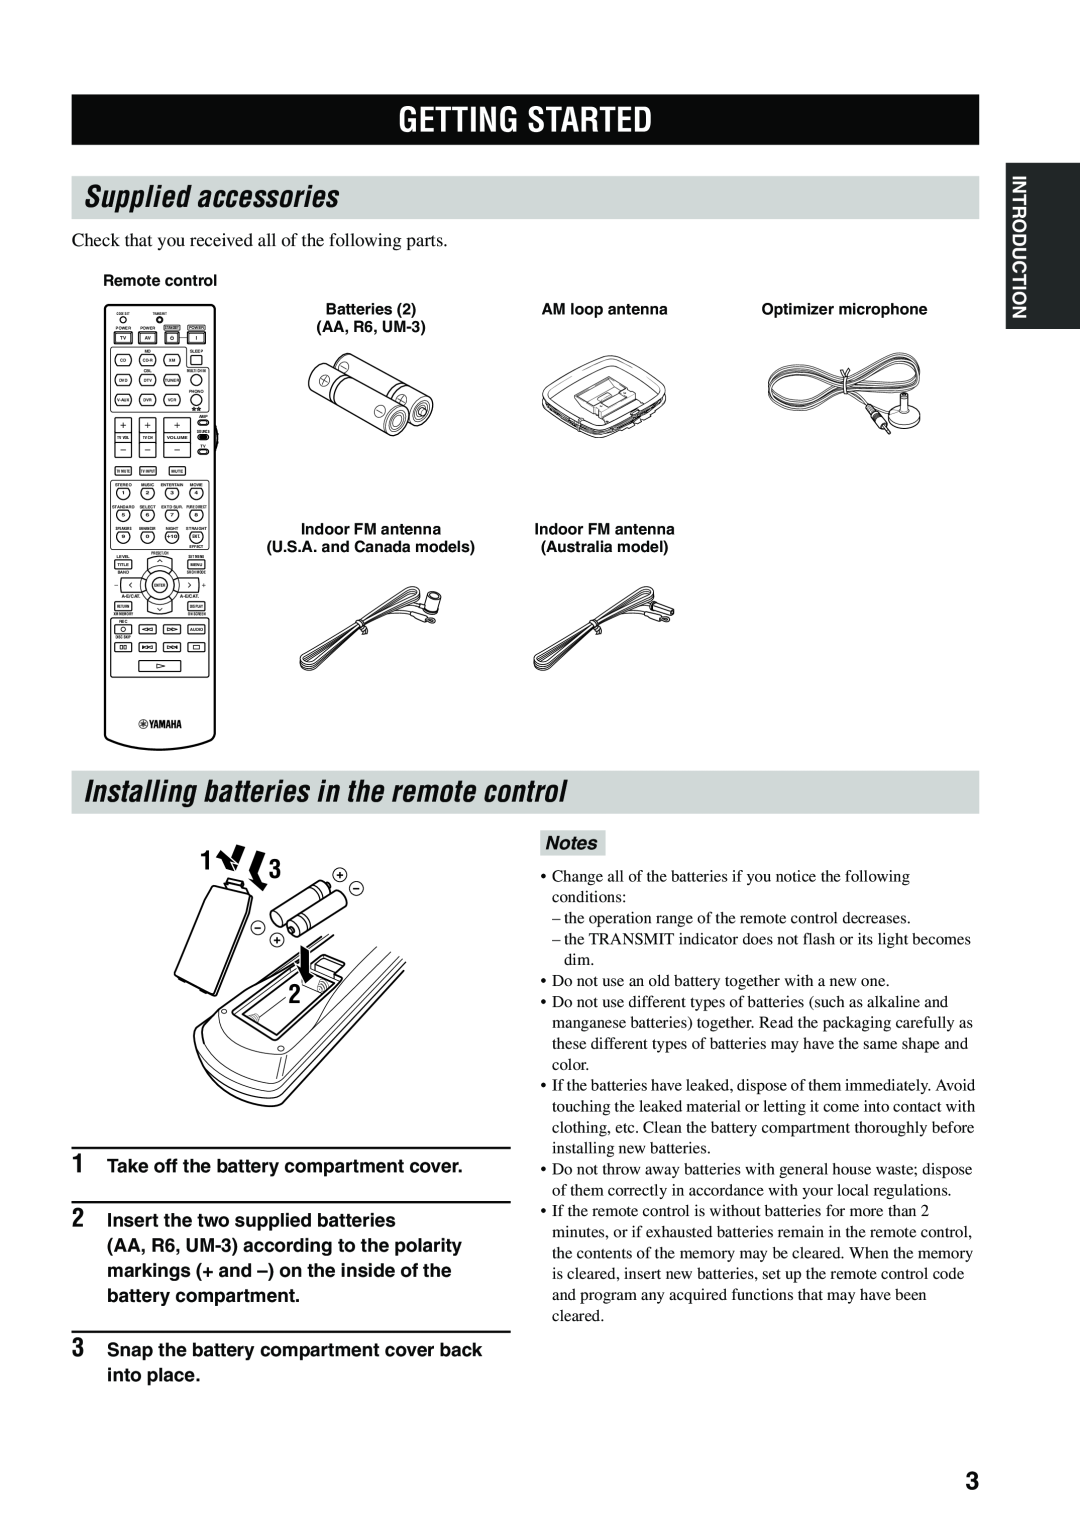 Yamaha HTR-5960 owner manual Getting Started, Supplied accessories, Installing batteries in the remote control, 13 2, Notes 